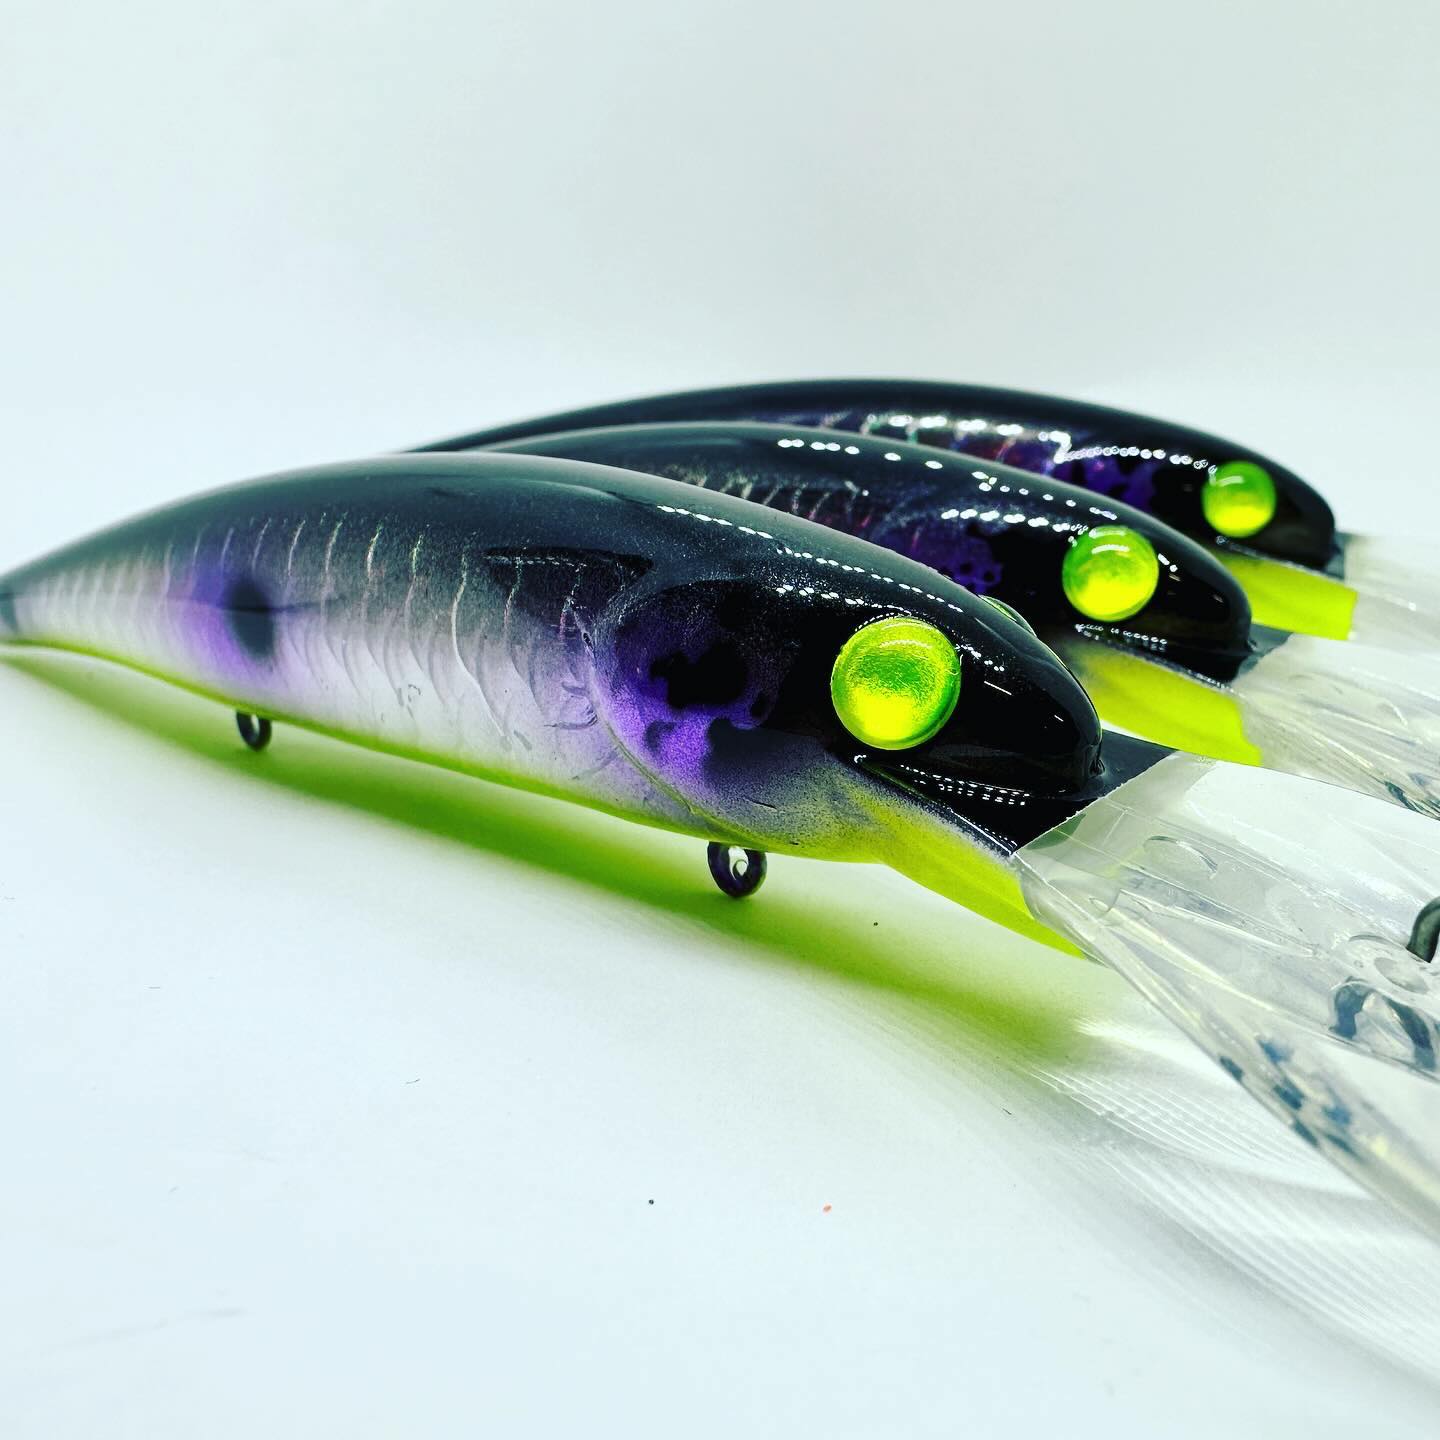 Custom Bandit Crankbait - Prismatic Knight by Vertical Jigs and Lures